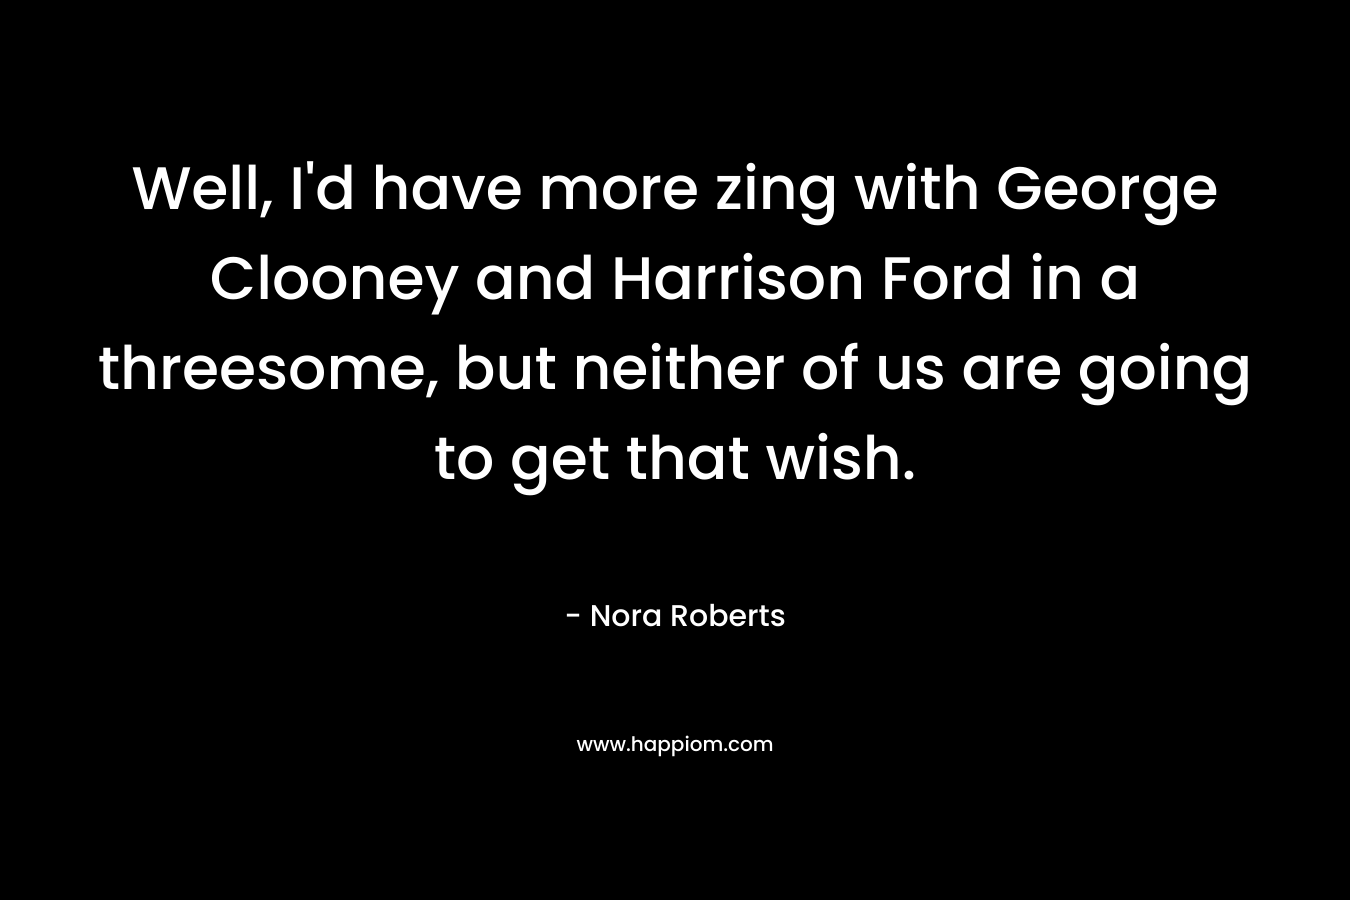 Well, I’d have more zing with George Clooney and Harrison Ford in a threesome, but neither of us are going to get that wish. – Nora Roberts